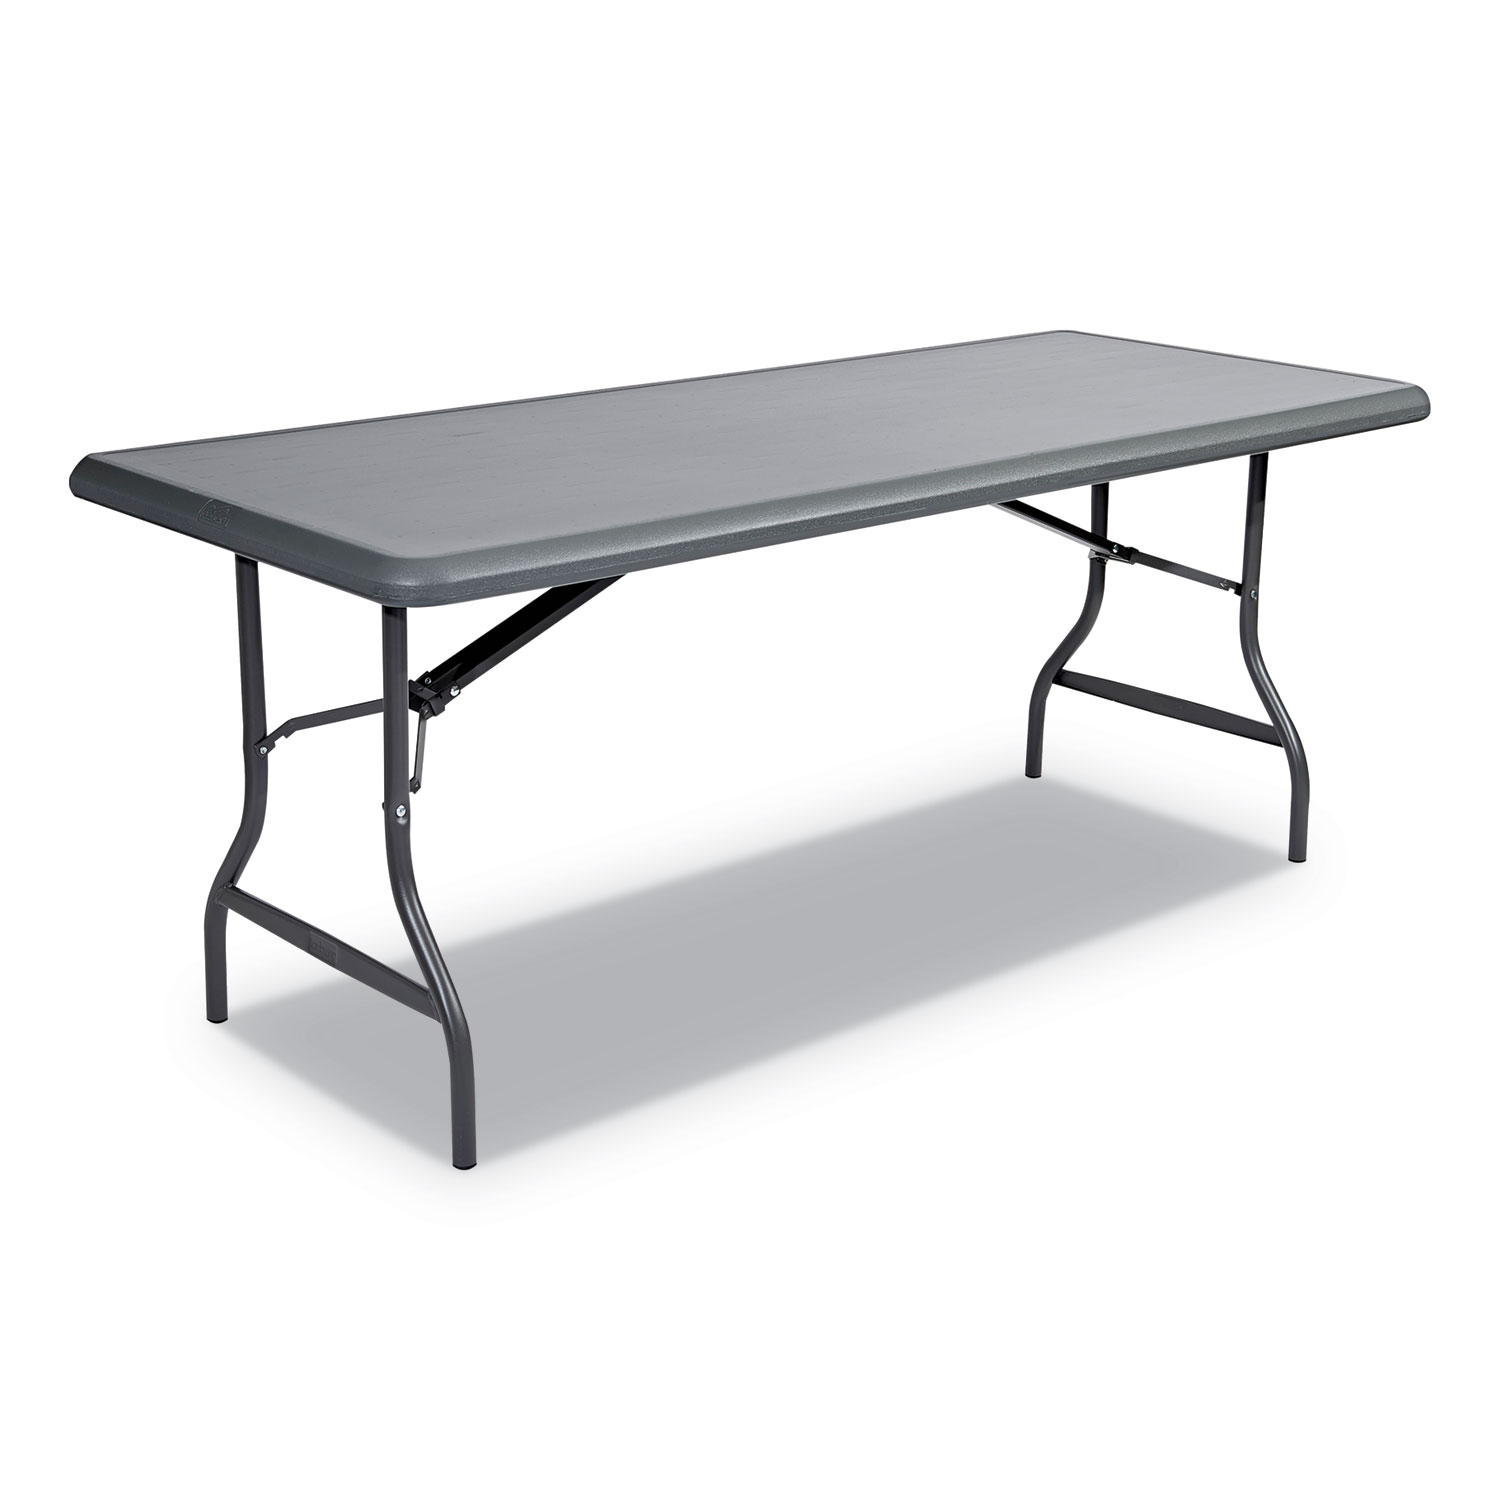  Iceberg 65227 IndestrucTables Too 1200 Series Folding Table, 72w x 30d x 29h, Charcoal (ICE65227) 